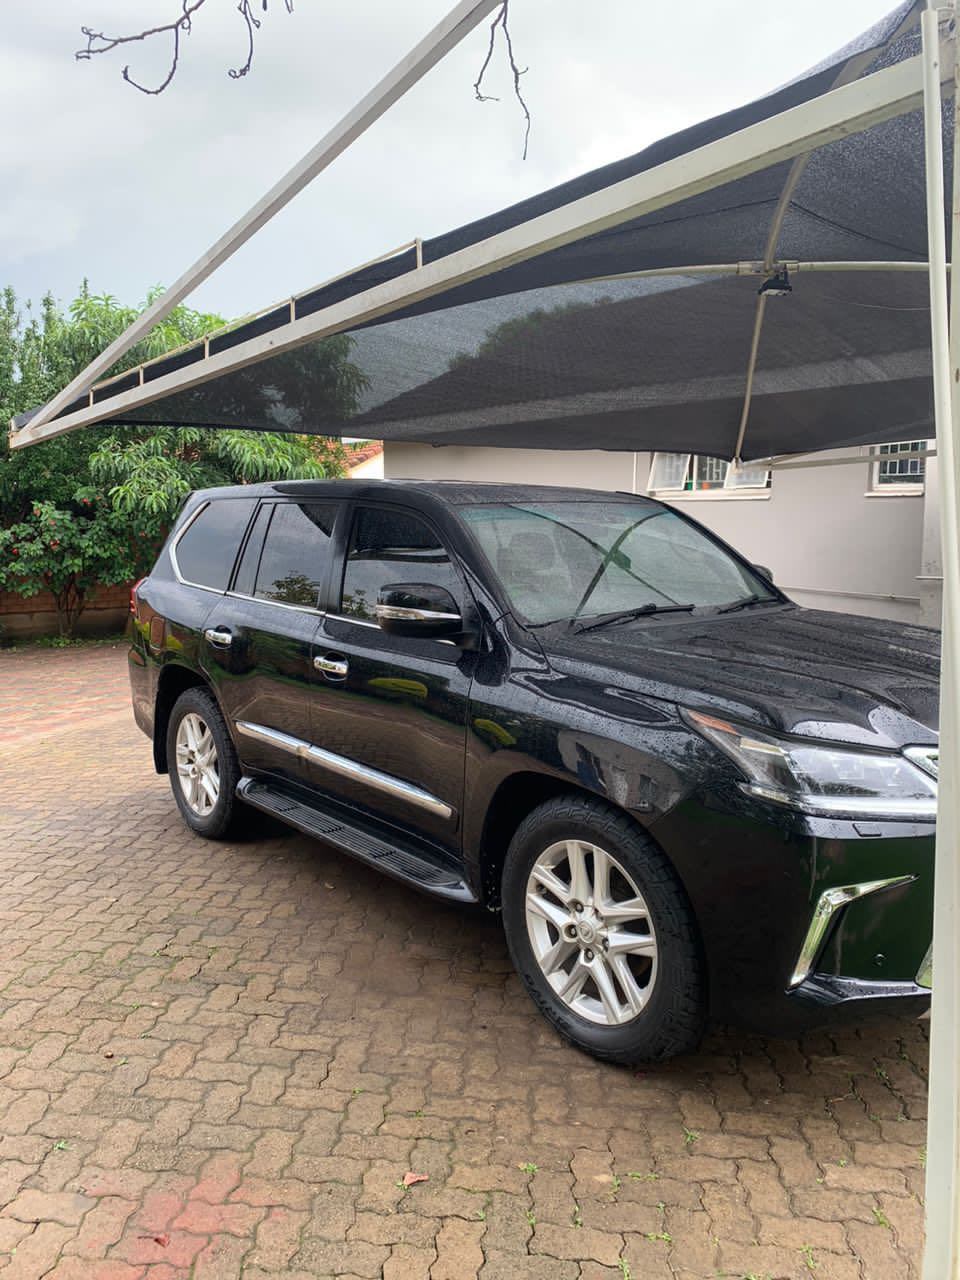 A picture of Toyota Lexus Lx570